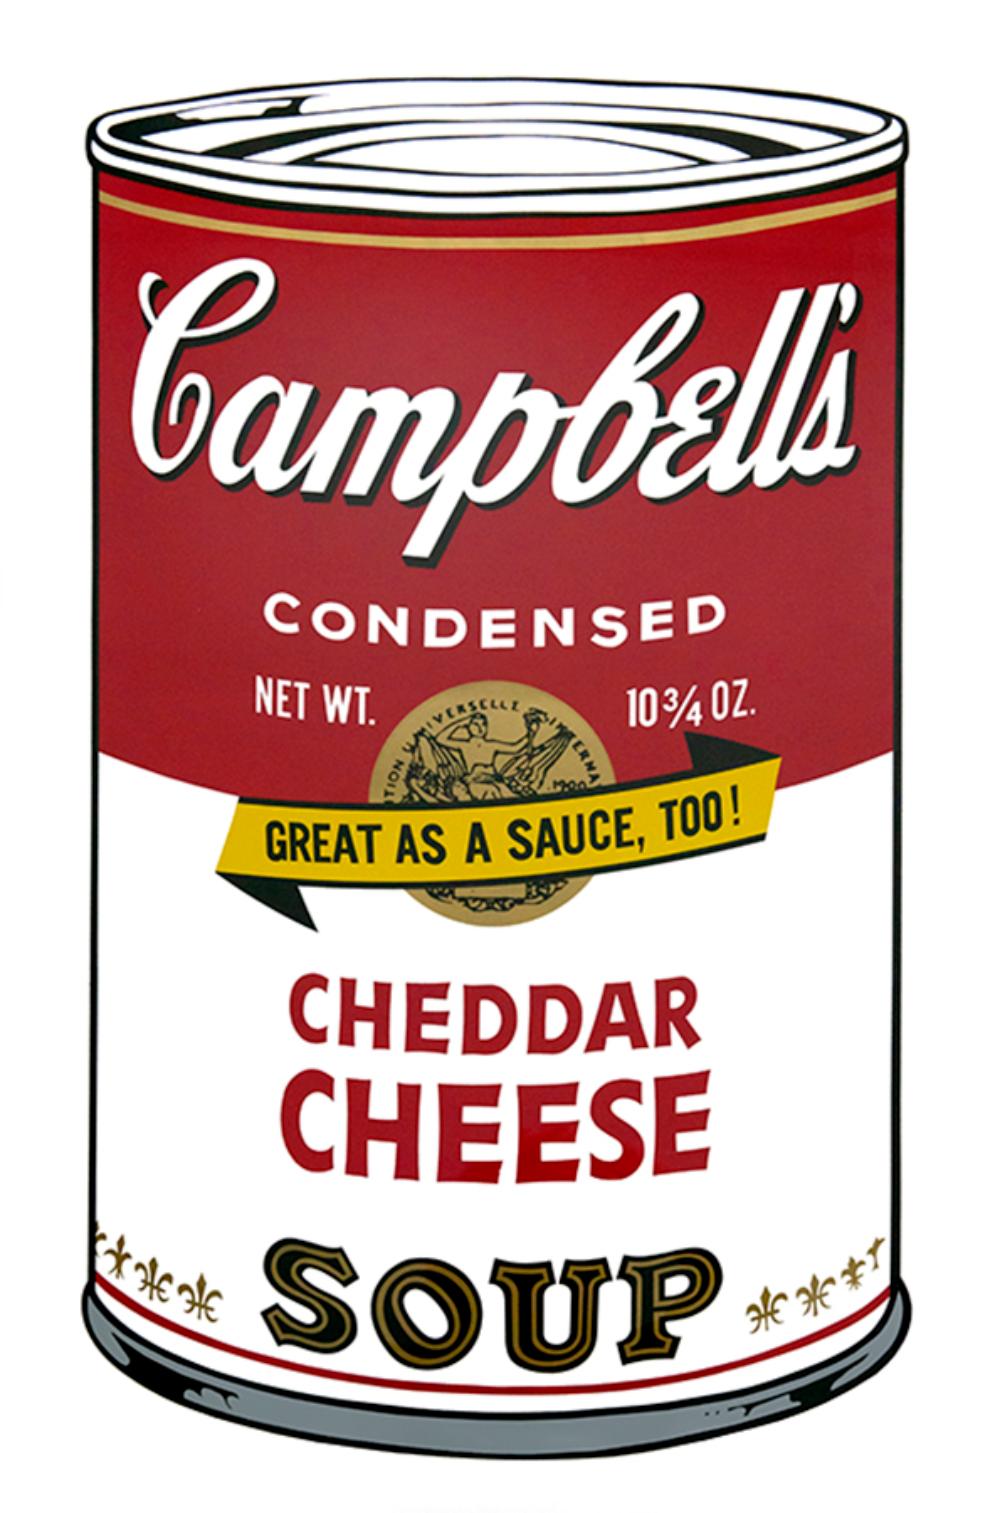 Cheddar Cheese, from Campbell's Soup  II